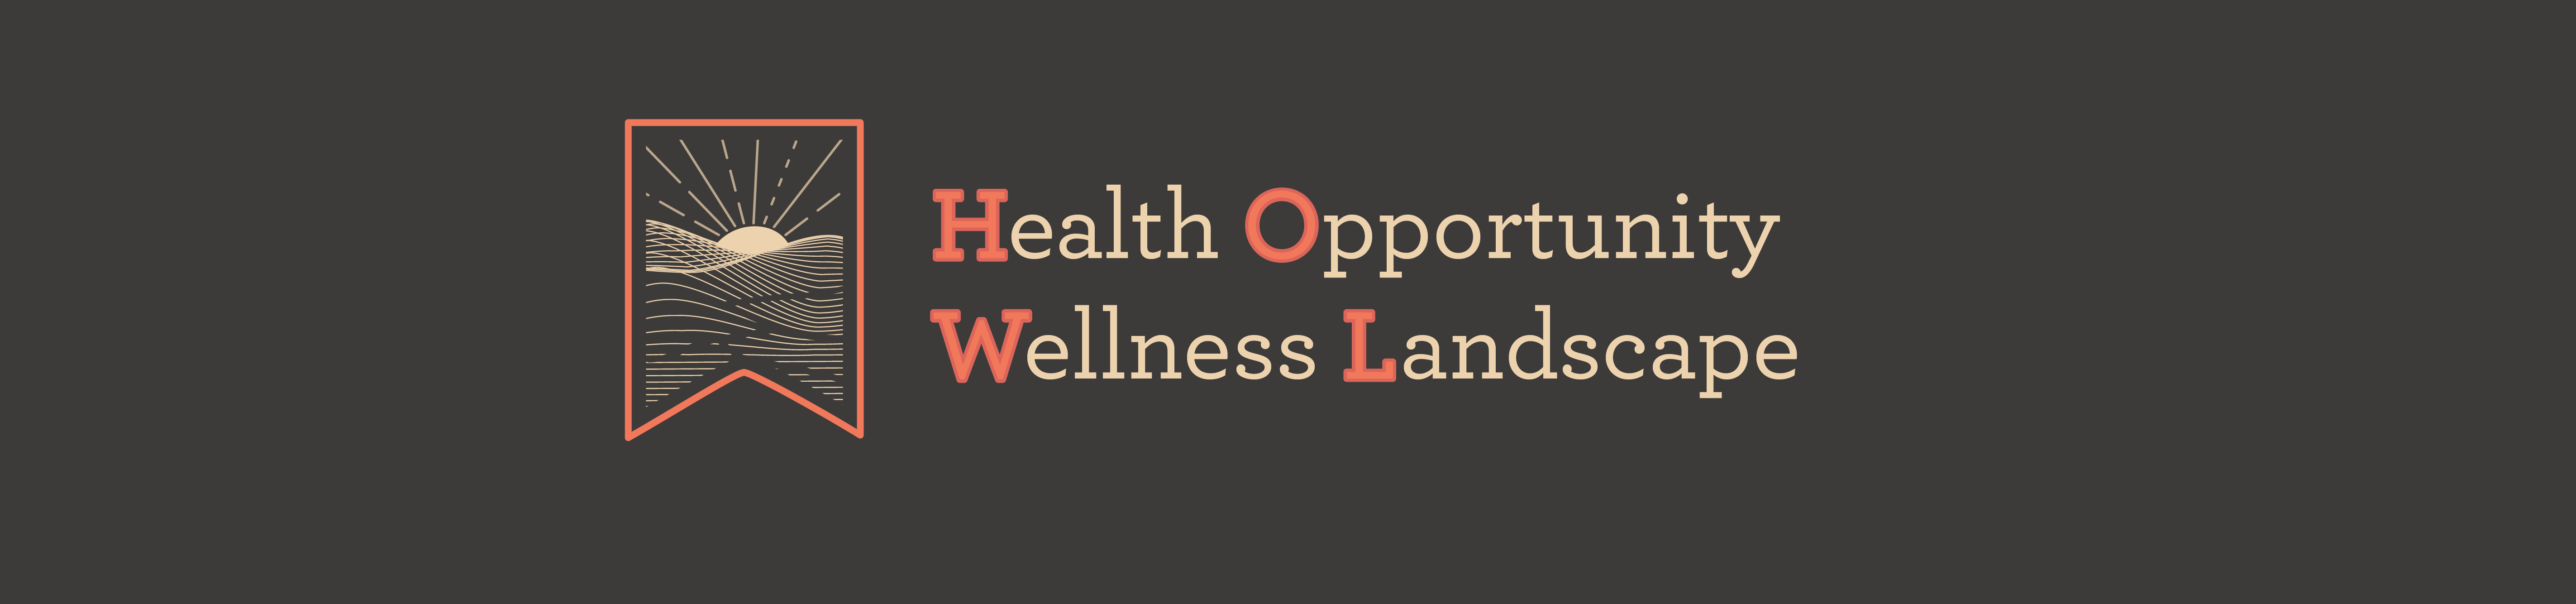 Health Opportunity Wellness Landscape